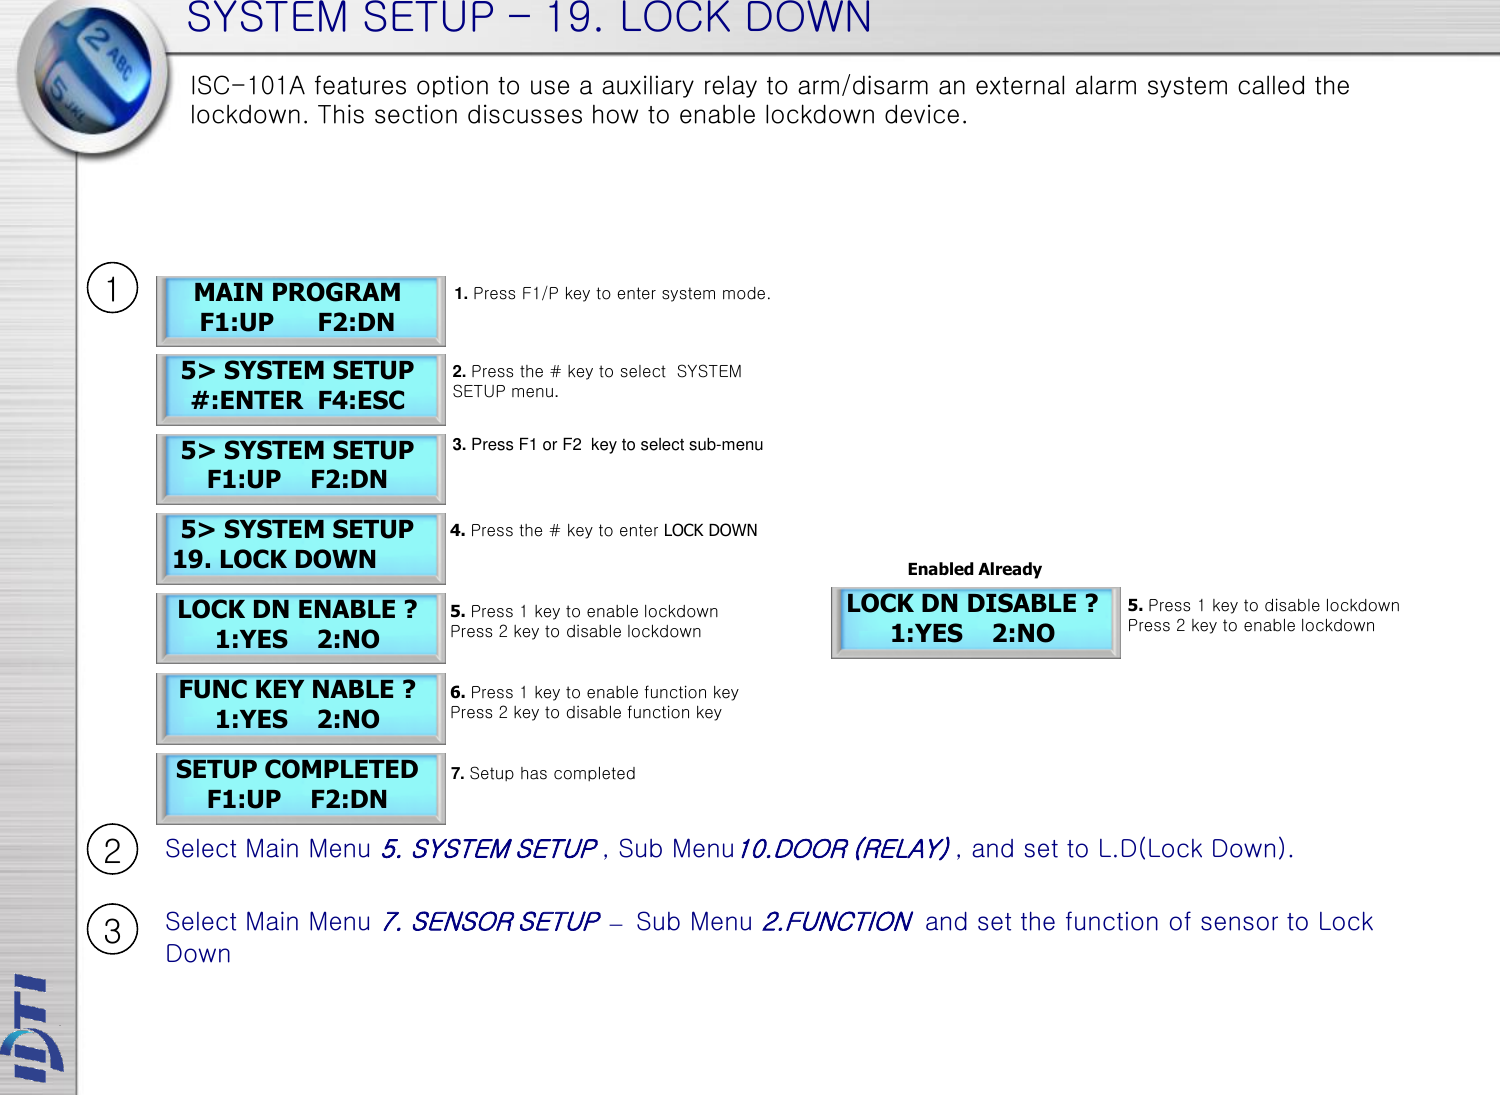 SYSTEM SETUP – 19. LOCK DOWN 5&gt; SYSTEM SETUP  19. LOCK DOWN LOCK DN ENABLE ? 1:YES    2:NO SETUP COMPLETED F1:UP    F2:DN 5&gt; SYSTEM SETUP F1:UP    F2:DN LOCK DN DISABLE ? 1:YES    2:NO MAIN PROGRAM F1:UP      F2:DN 5&gt; SYSTEM SETUP #:ENTER  F4:ESC 1. Press F1/P key to enter system mode. 2. Press the # key to select  SYSTEM SETUP menu. 5. Press 1 key to enable lockdown  Press 2 key to disable lockdown 4. Press the # key to enter LOCK DOWN 3. Press F1 or F2  key to select sub-menu 7. Setup has completed 5. Press 1 key to disable lockdown  Press 2 key to enable lockdown ISC-101A features option to use a auxiliary relay to arm/disarm an external alarm system called the lockdown. This section discusses how to enable lockdown device.  Select Main Menu 5. SYSTEM SETUP , Sub Menu10.DOOR (RELAY) , and set to L.D(Lock Down). Select Main Menu 7. SENSOR SETUP – Sub Menu 2.FUNCTION  and set the function of sensor to Lock Down 1 2 3 FUNC KEY NABLE ? 1:YES    2:NO 6. Press 1 key to enable function key Press 2 key to disable function key Enabled Already 